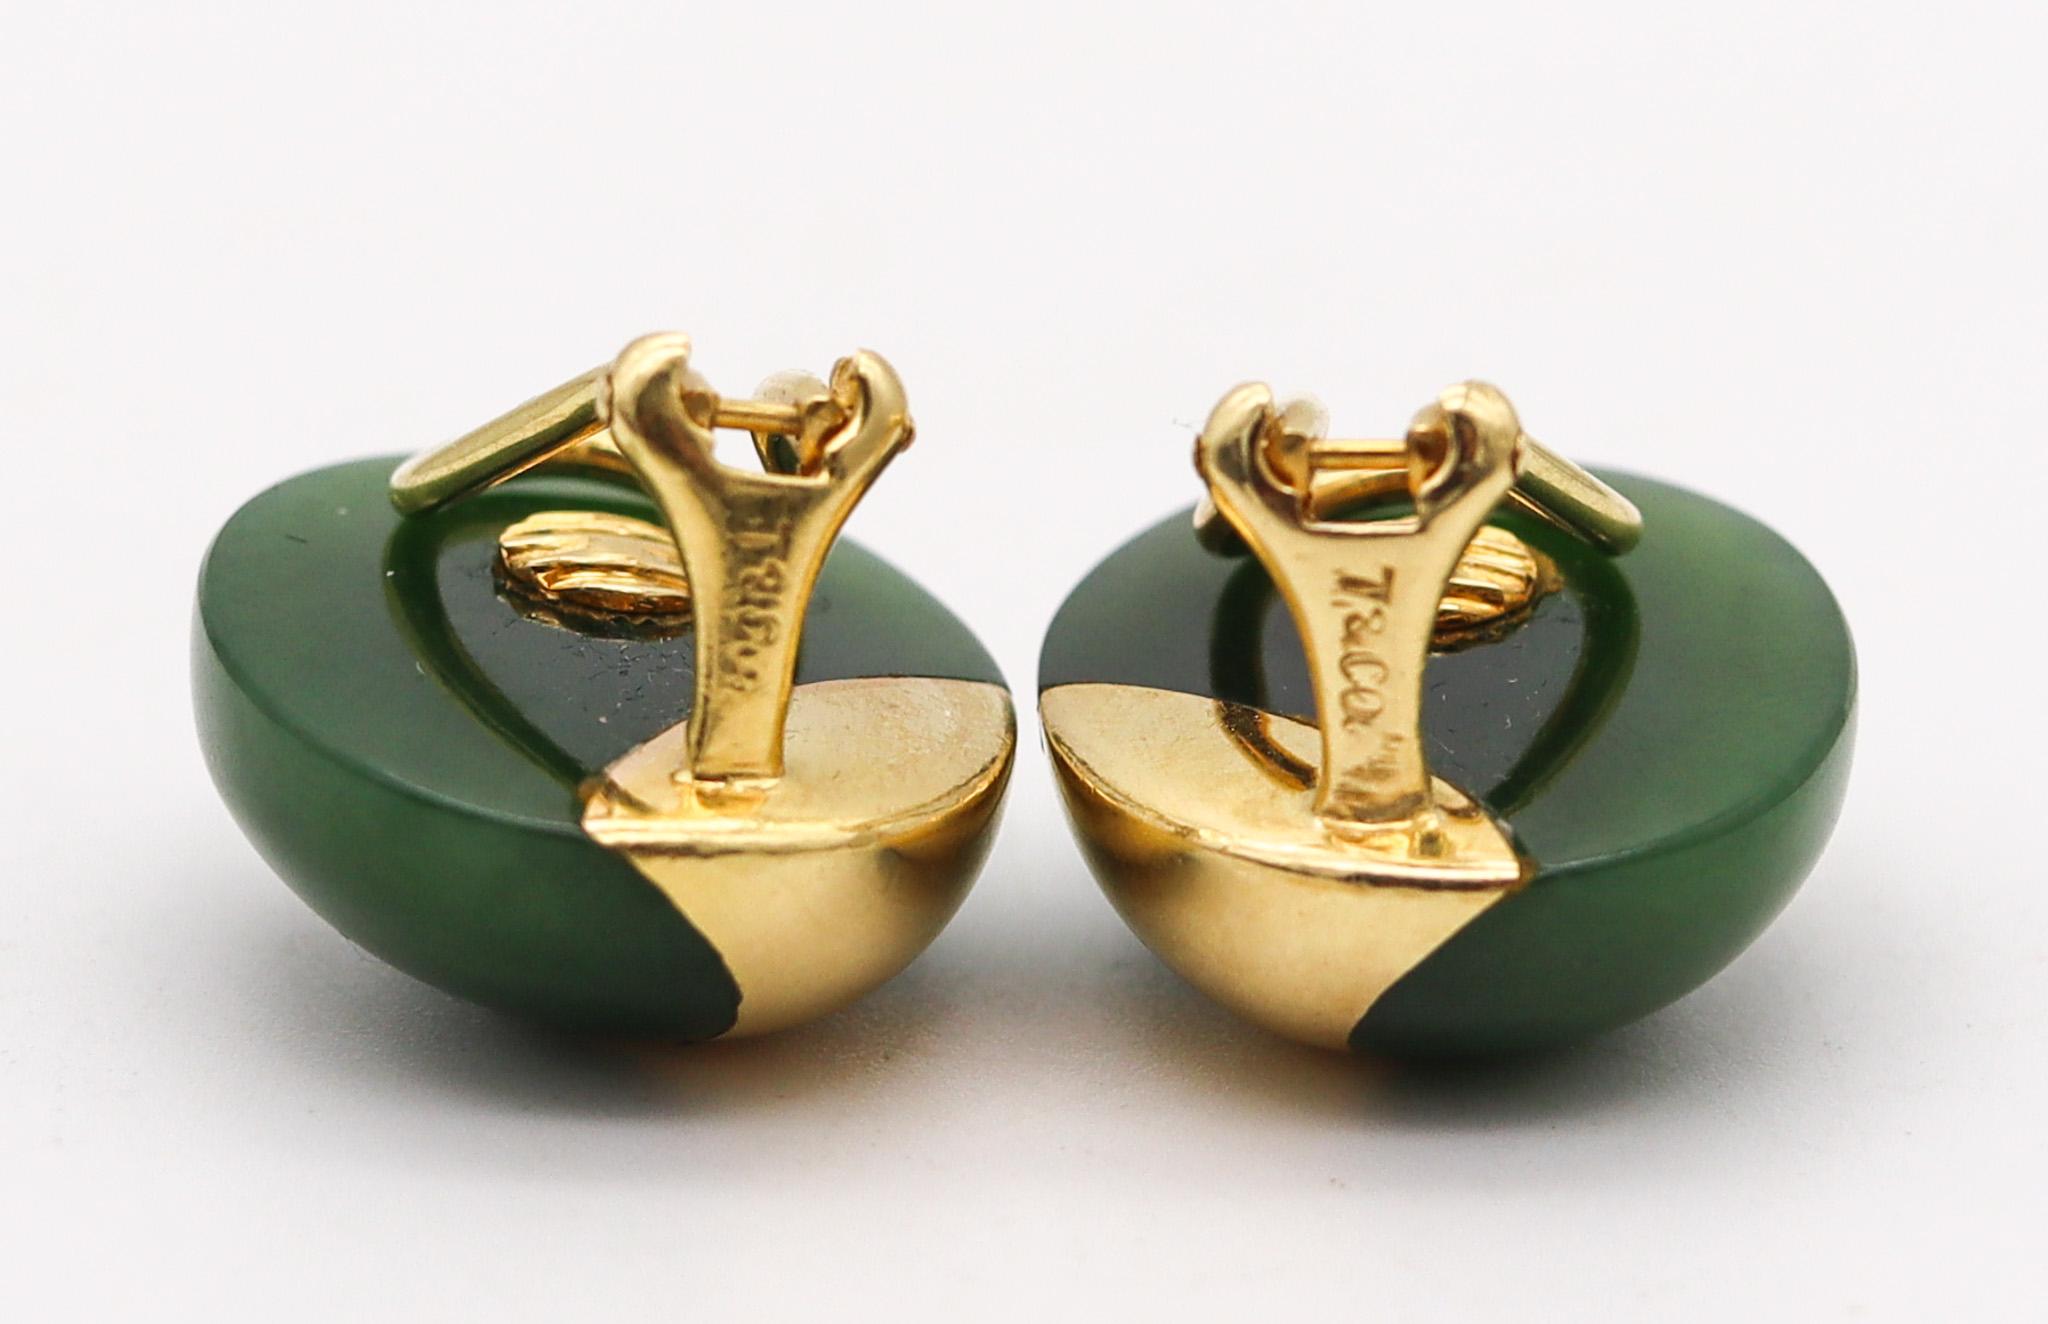 Cabochon Tiffany Co 1978 Angela Cummings Jade Oval Clips Earrings In 18Kt Yellow Gold For Sale